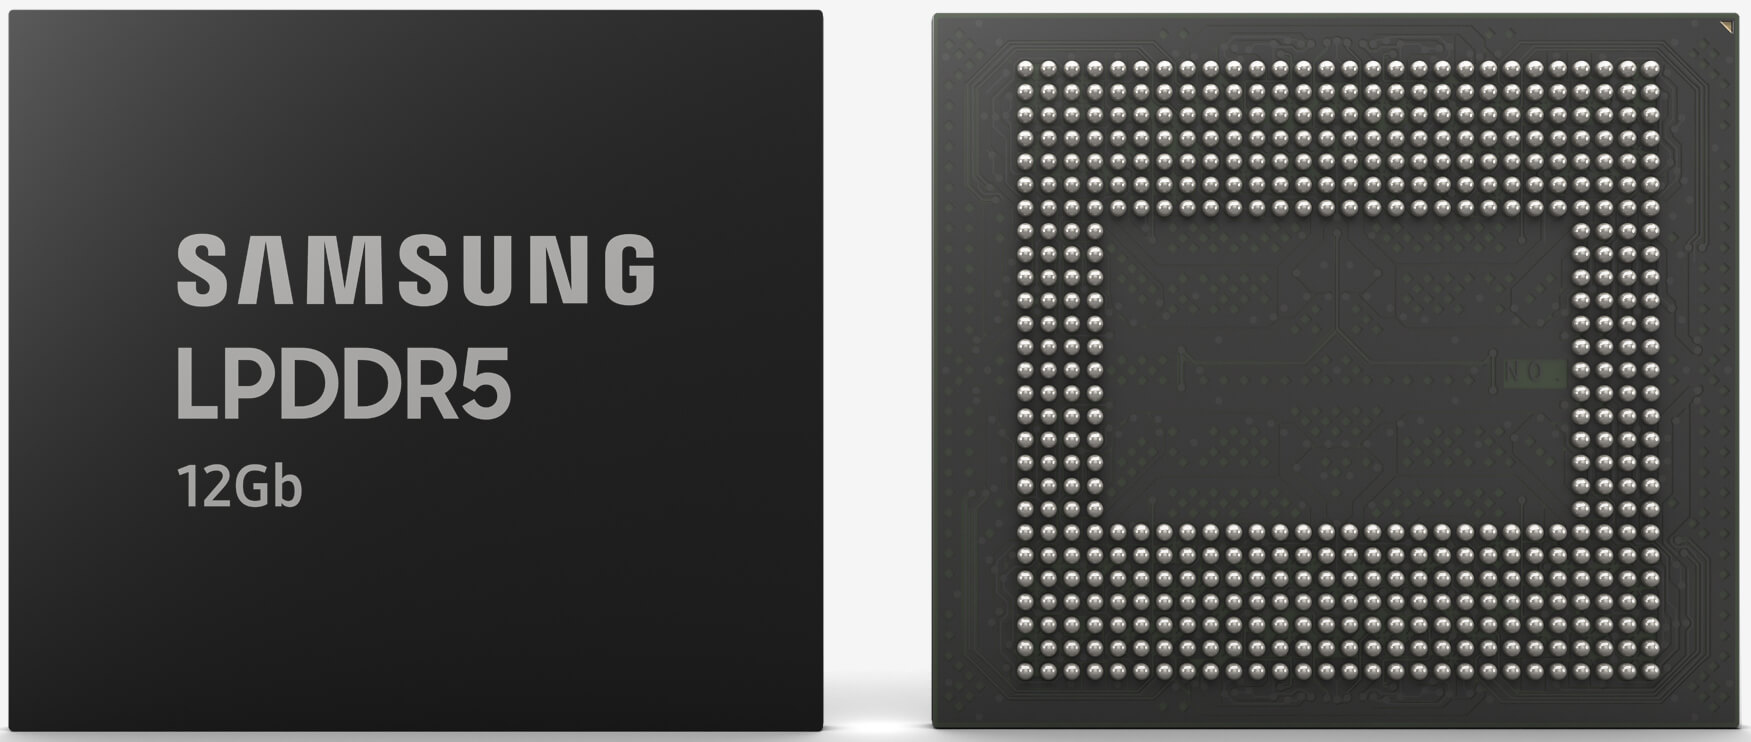 Samsung is now mass producing 12Gb LPDDR5 mobile DRAM optimized for 5G and AI